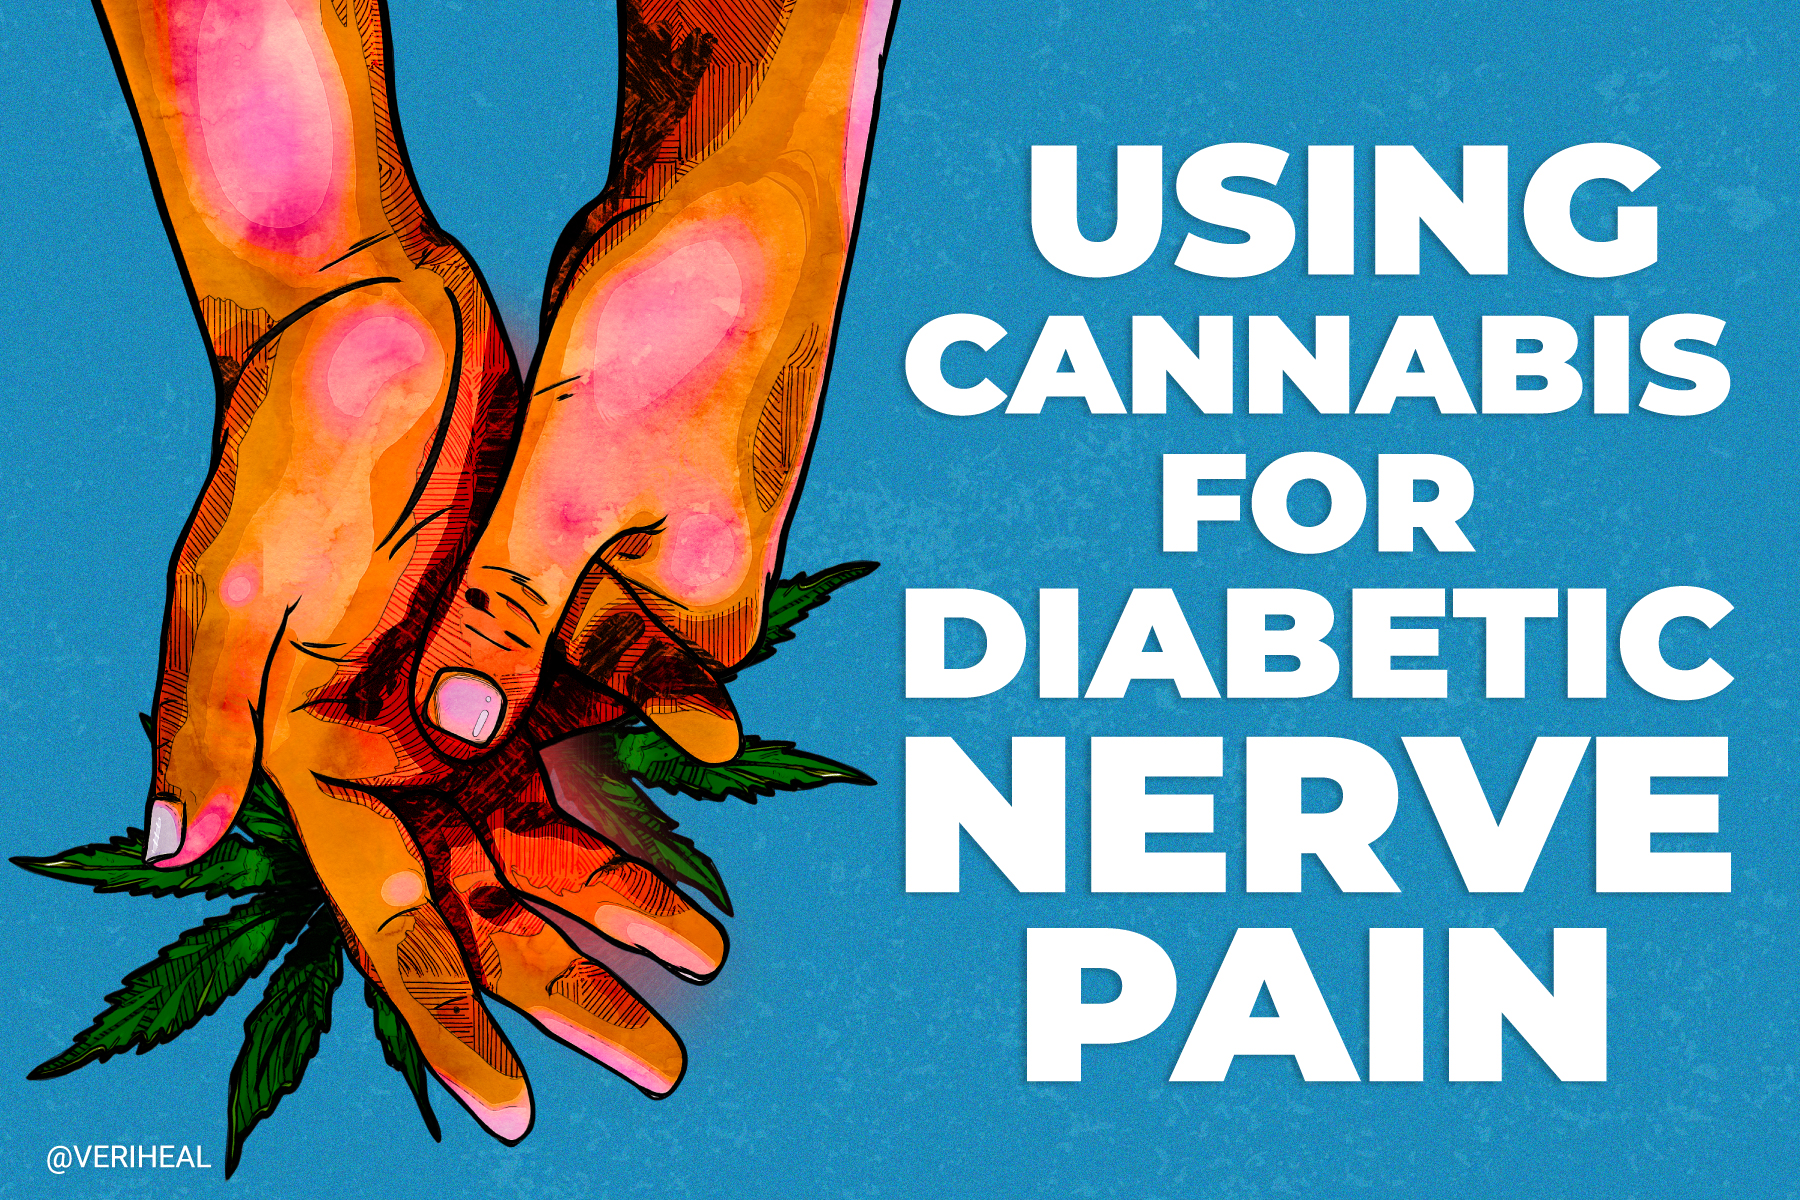 THC Can Effectively Reduce Diabetic Nerve Pain, Study Says